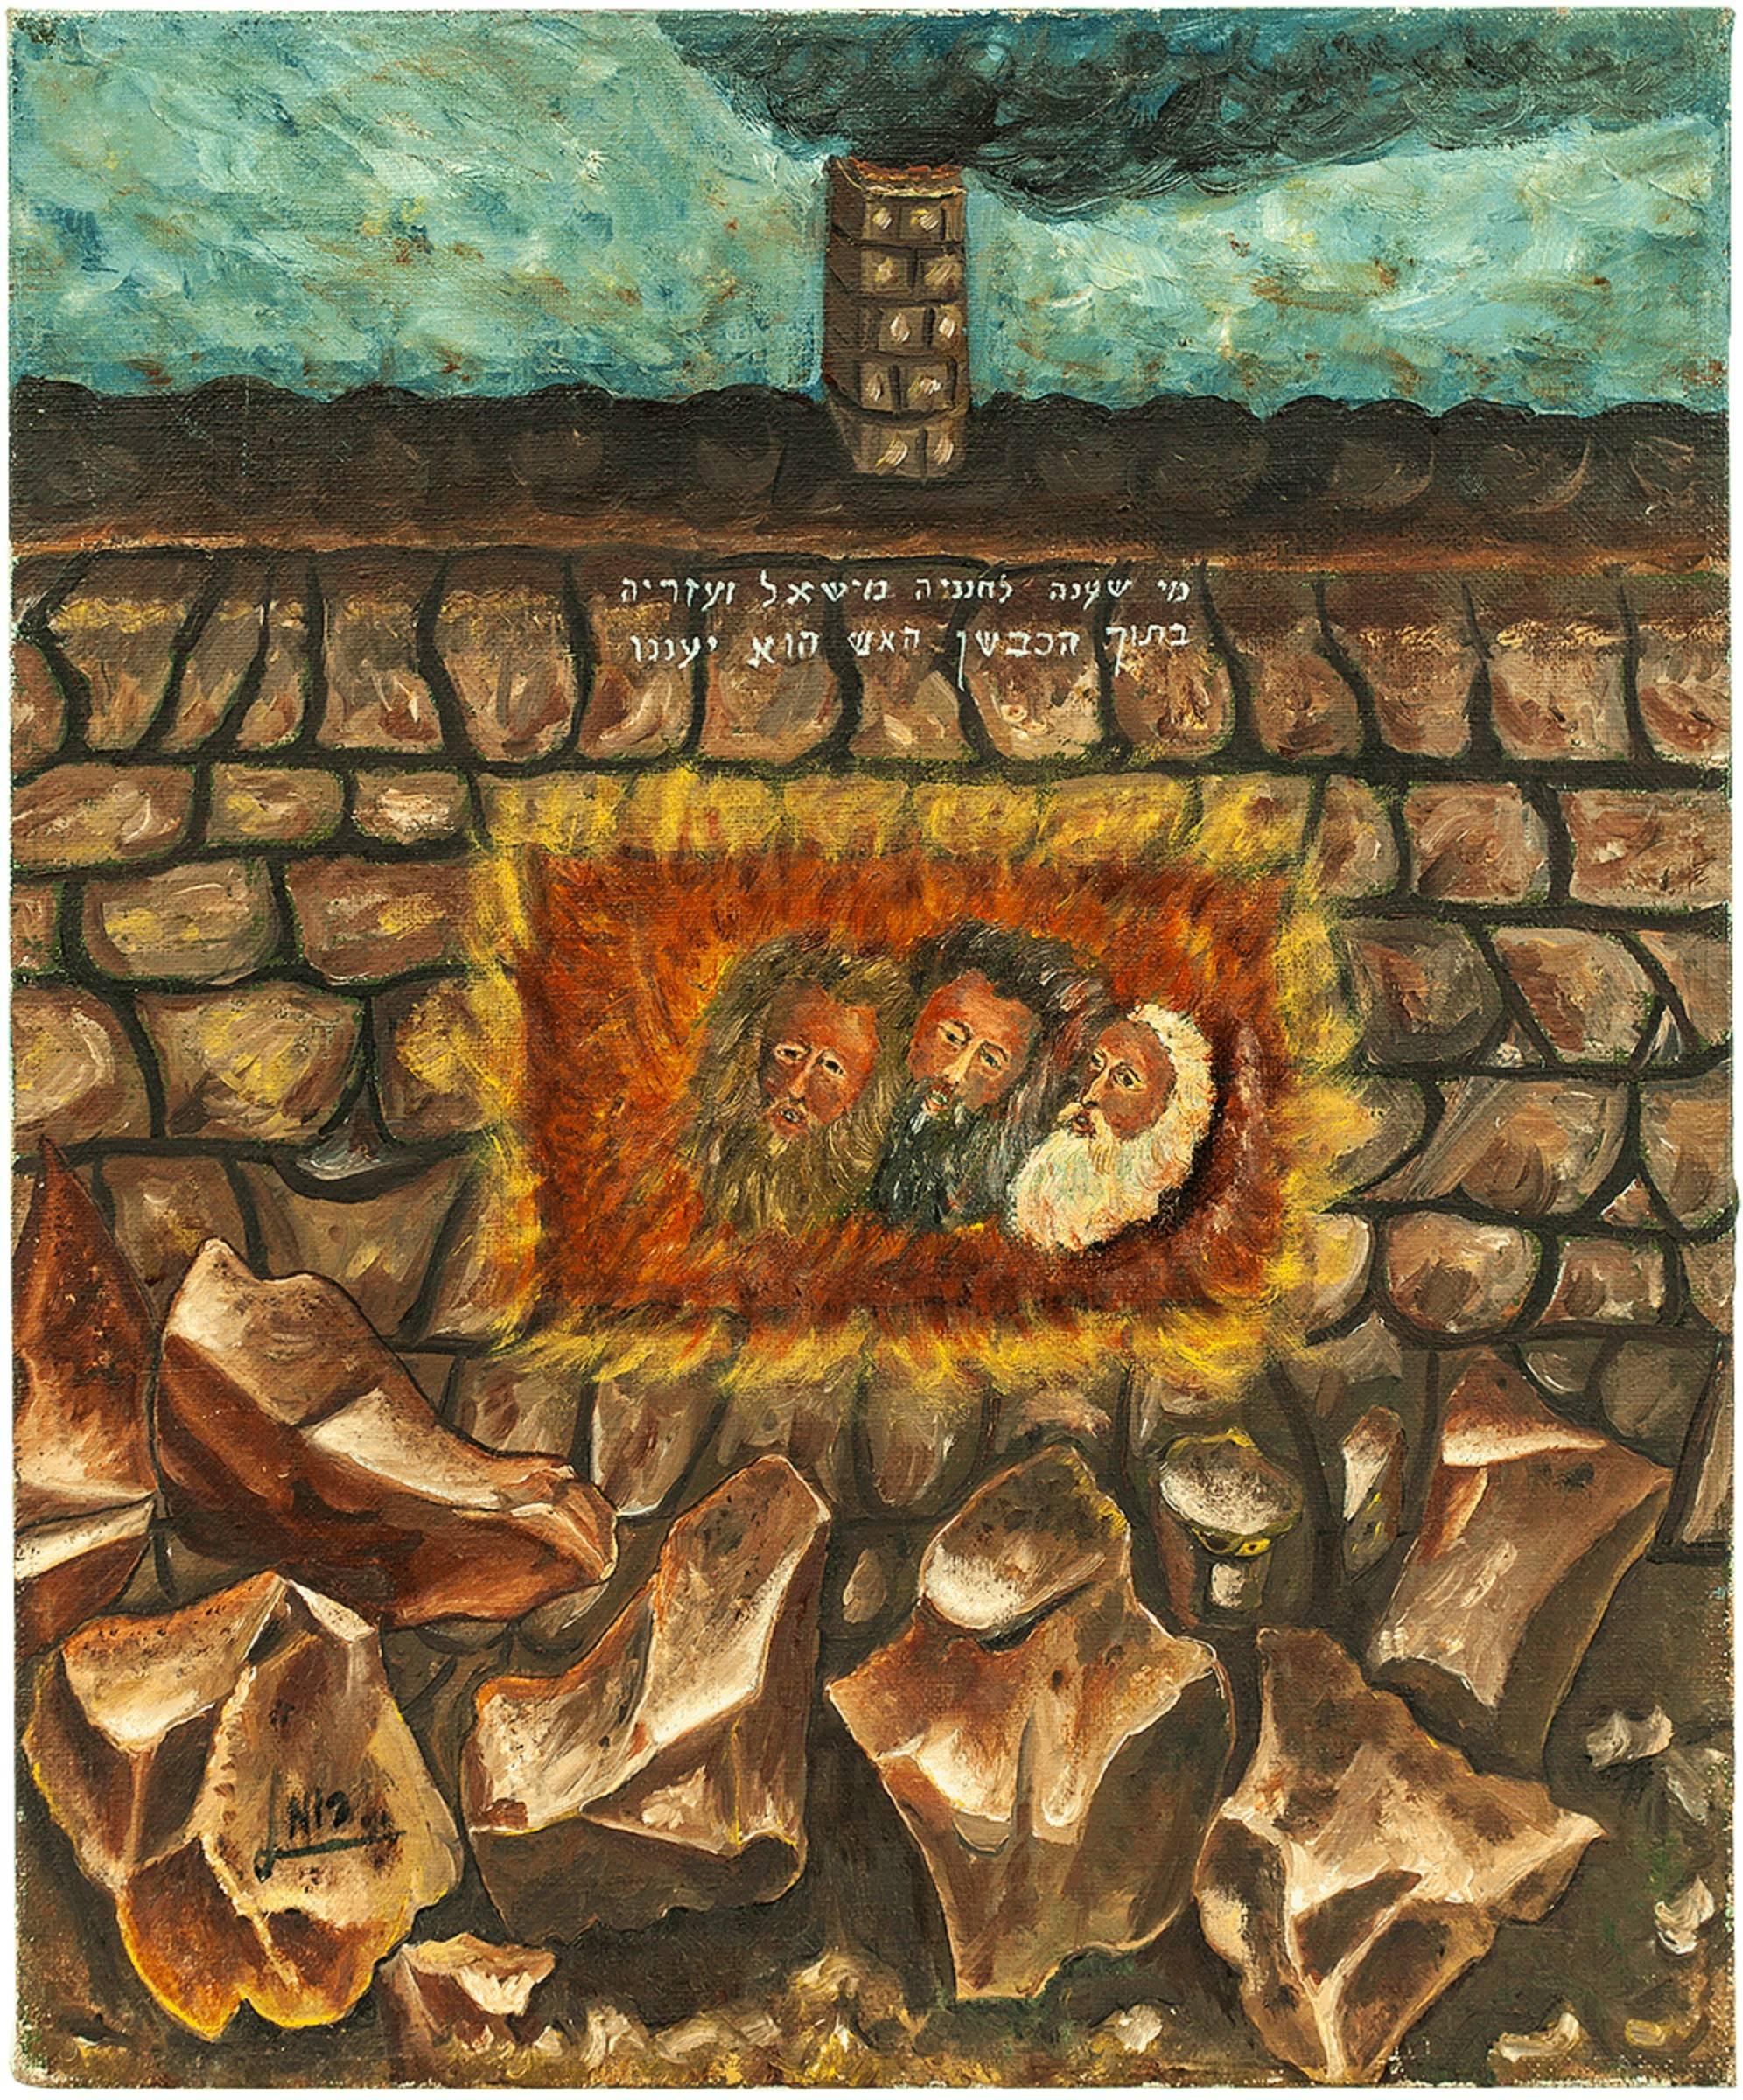 Hananiah, Mishael, and Azariah in the Furnace of Fire, Prayer, Oil Painting